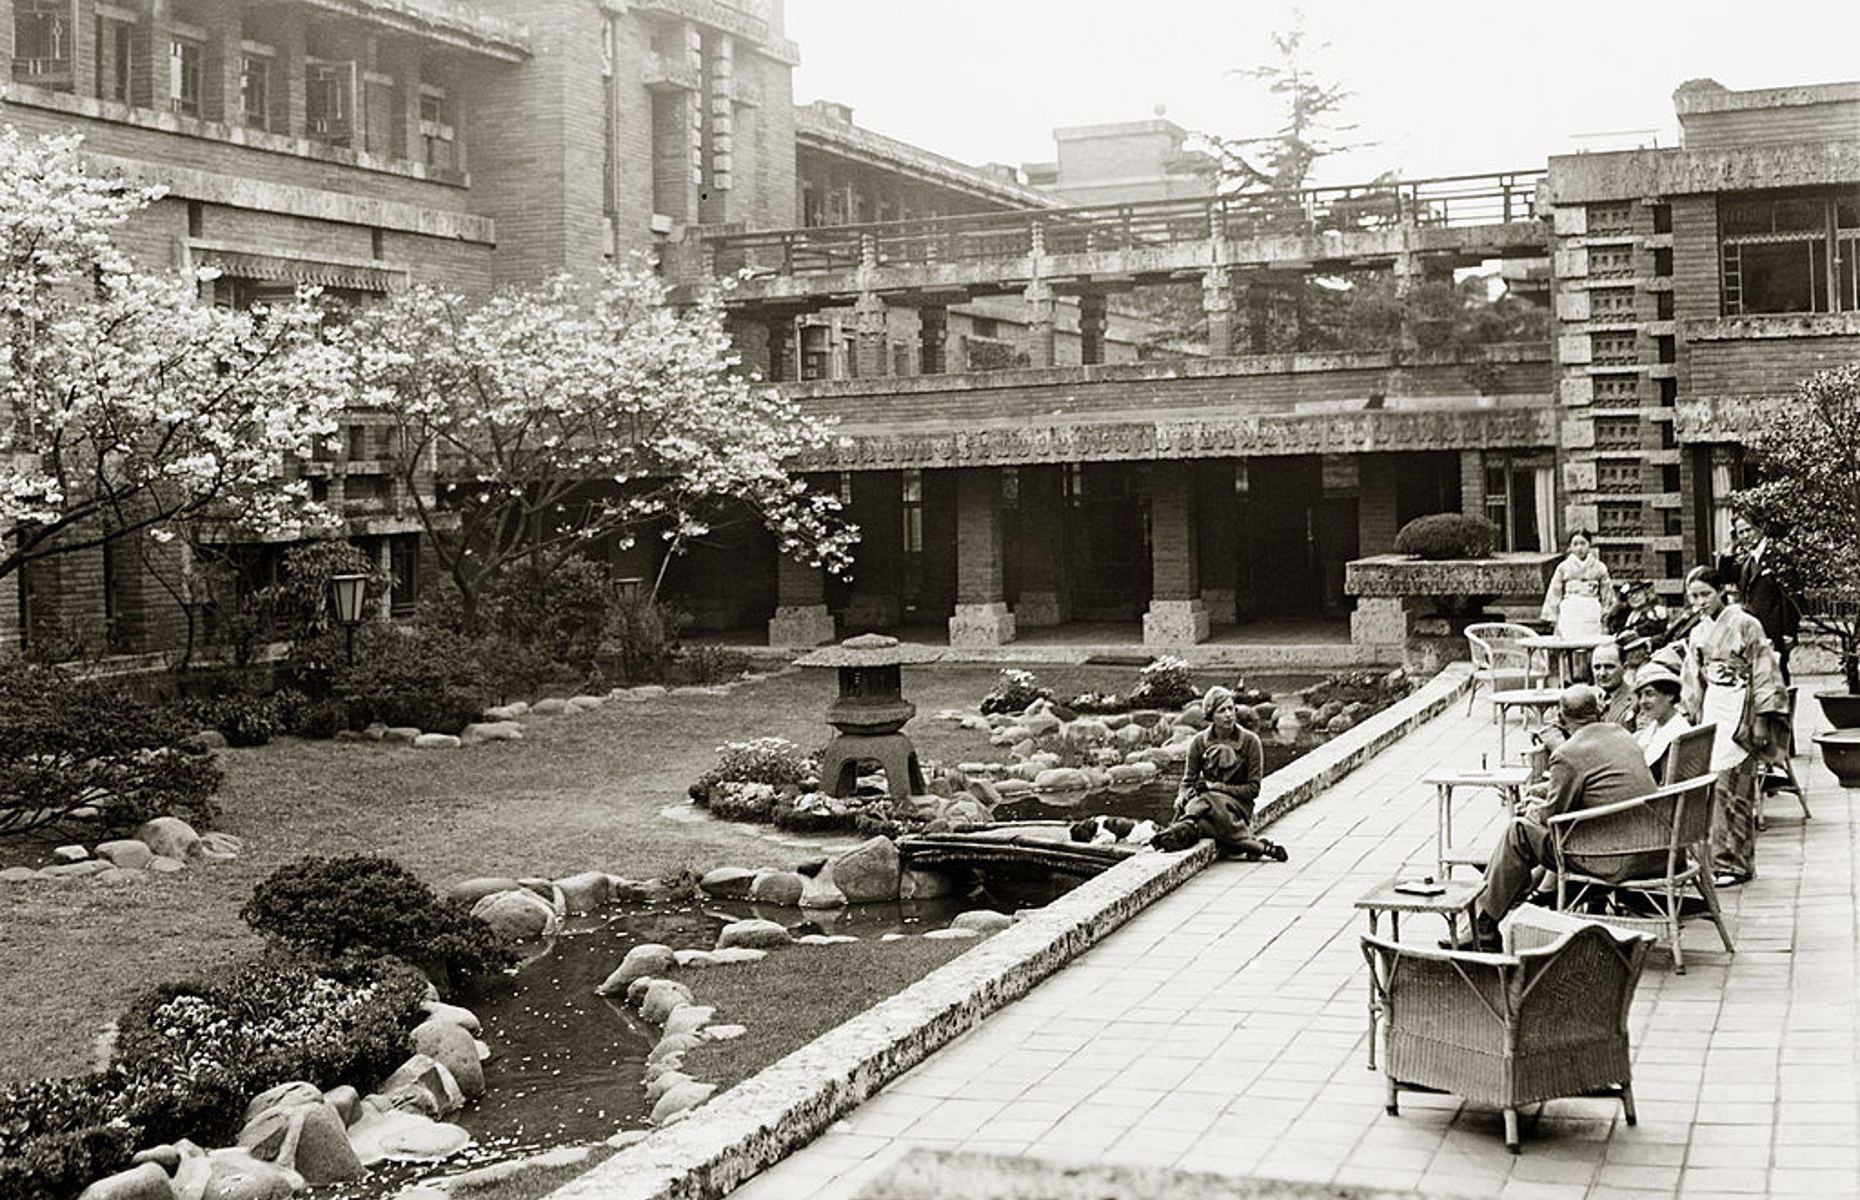 <p>The Imperial Hotel (pictured), designed by Frank Lloyd Wright, was opened in 1923. After its destruction during the Second World War and the end of the American occupation in 1952, Tokyo was completely rebuilt. Sadly this hotel was demolished in 1968. In the 1970s, Tokyo had one of the tallest skyscrapers in Asia and the building of an extensive transport system brought commerce, employment and an influx of tourists, which continues today.</p>